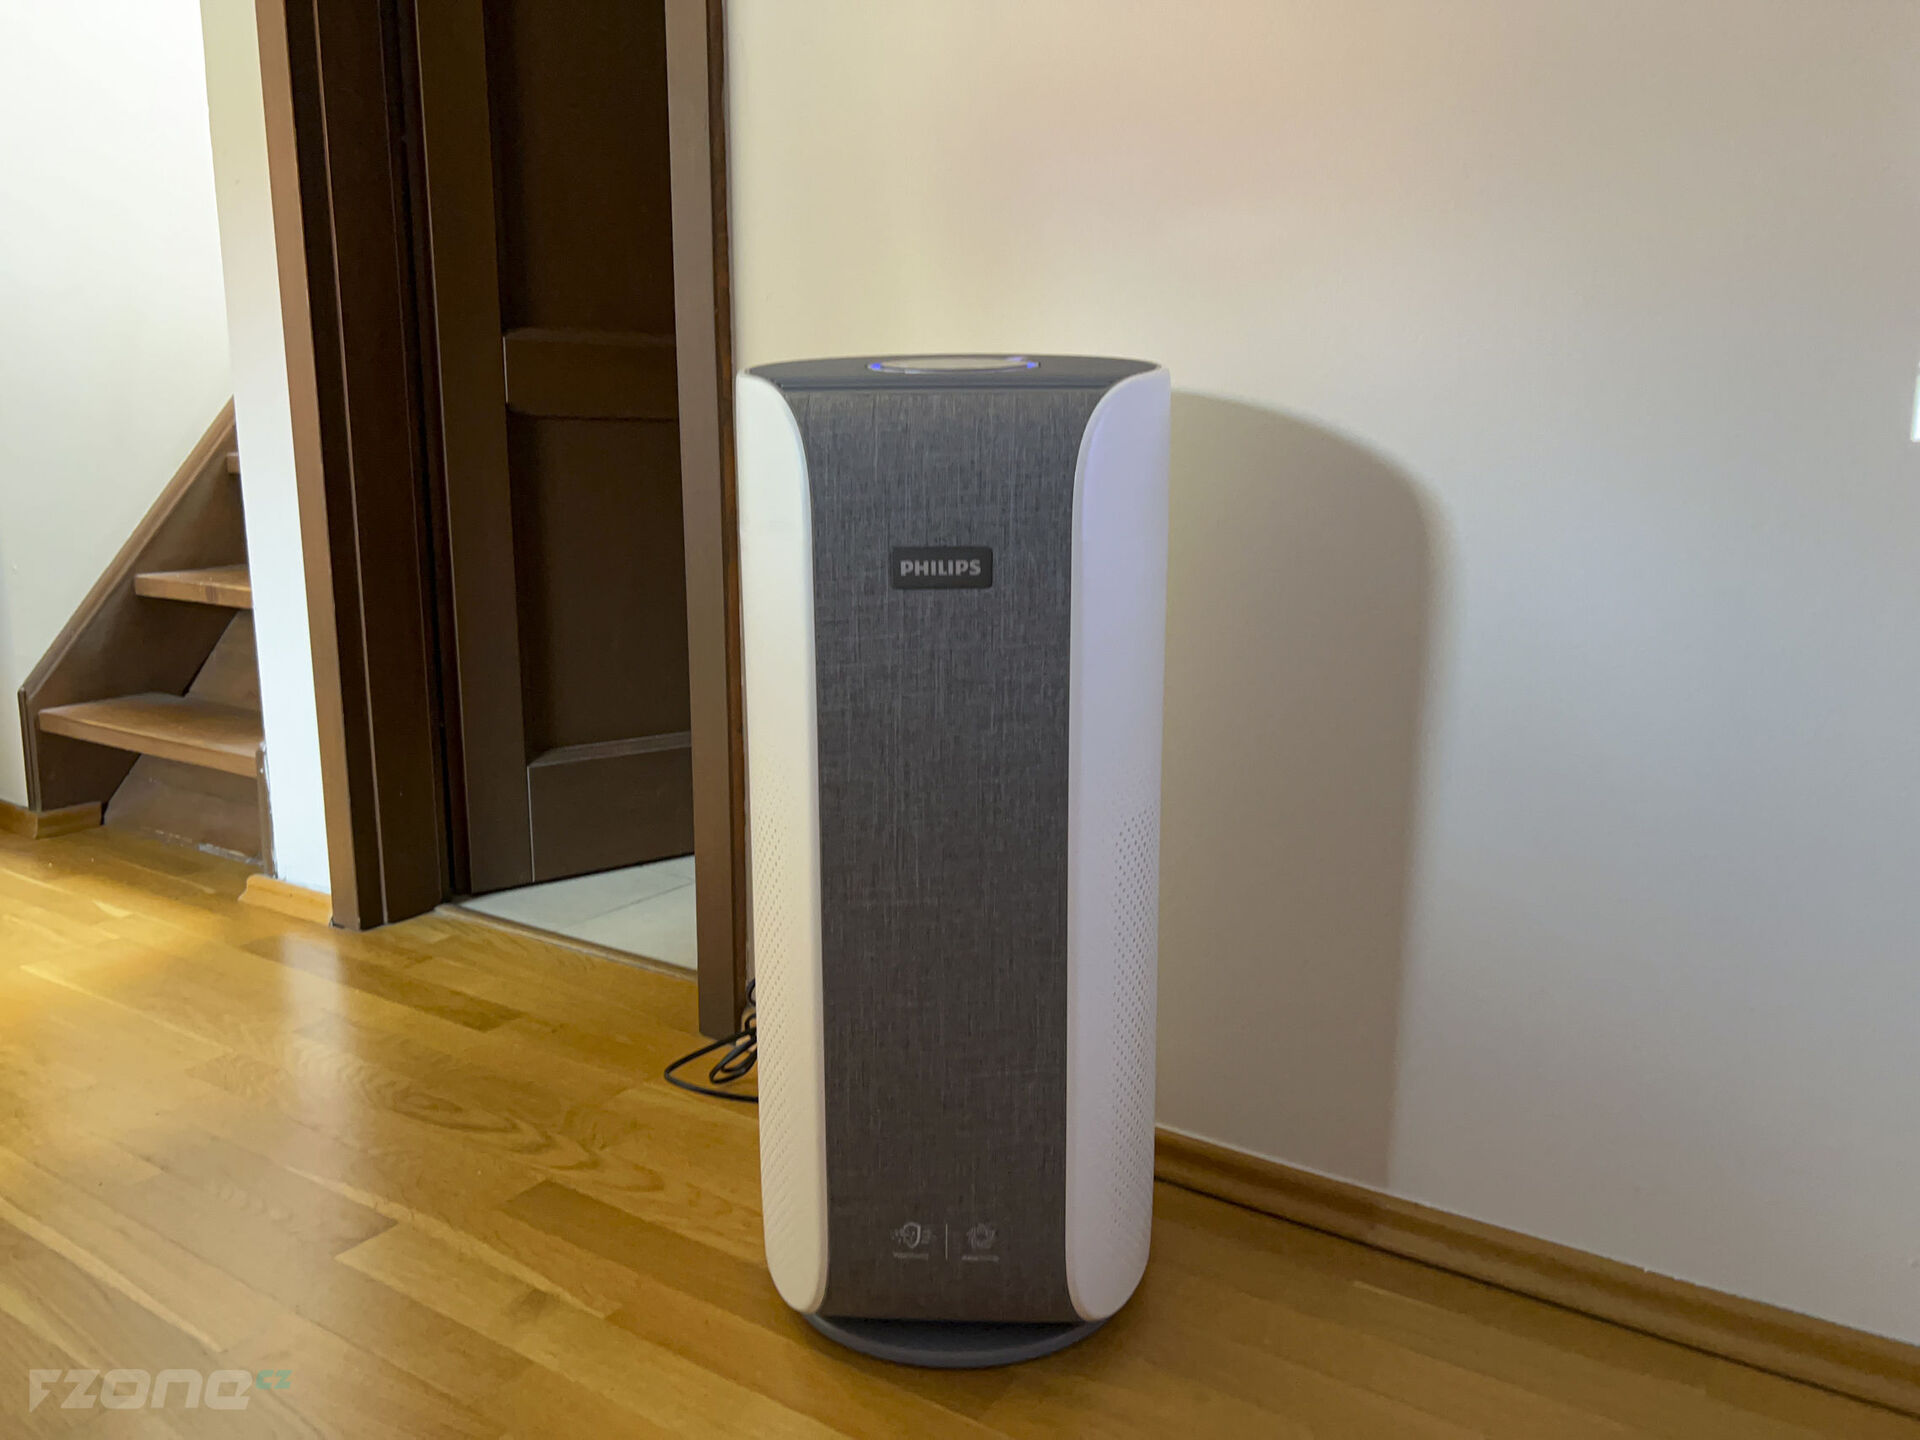 Philips Dual Scan AC3858/51